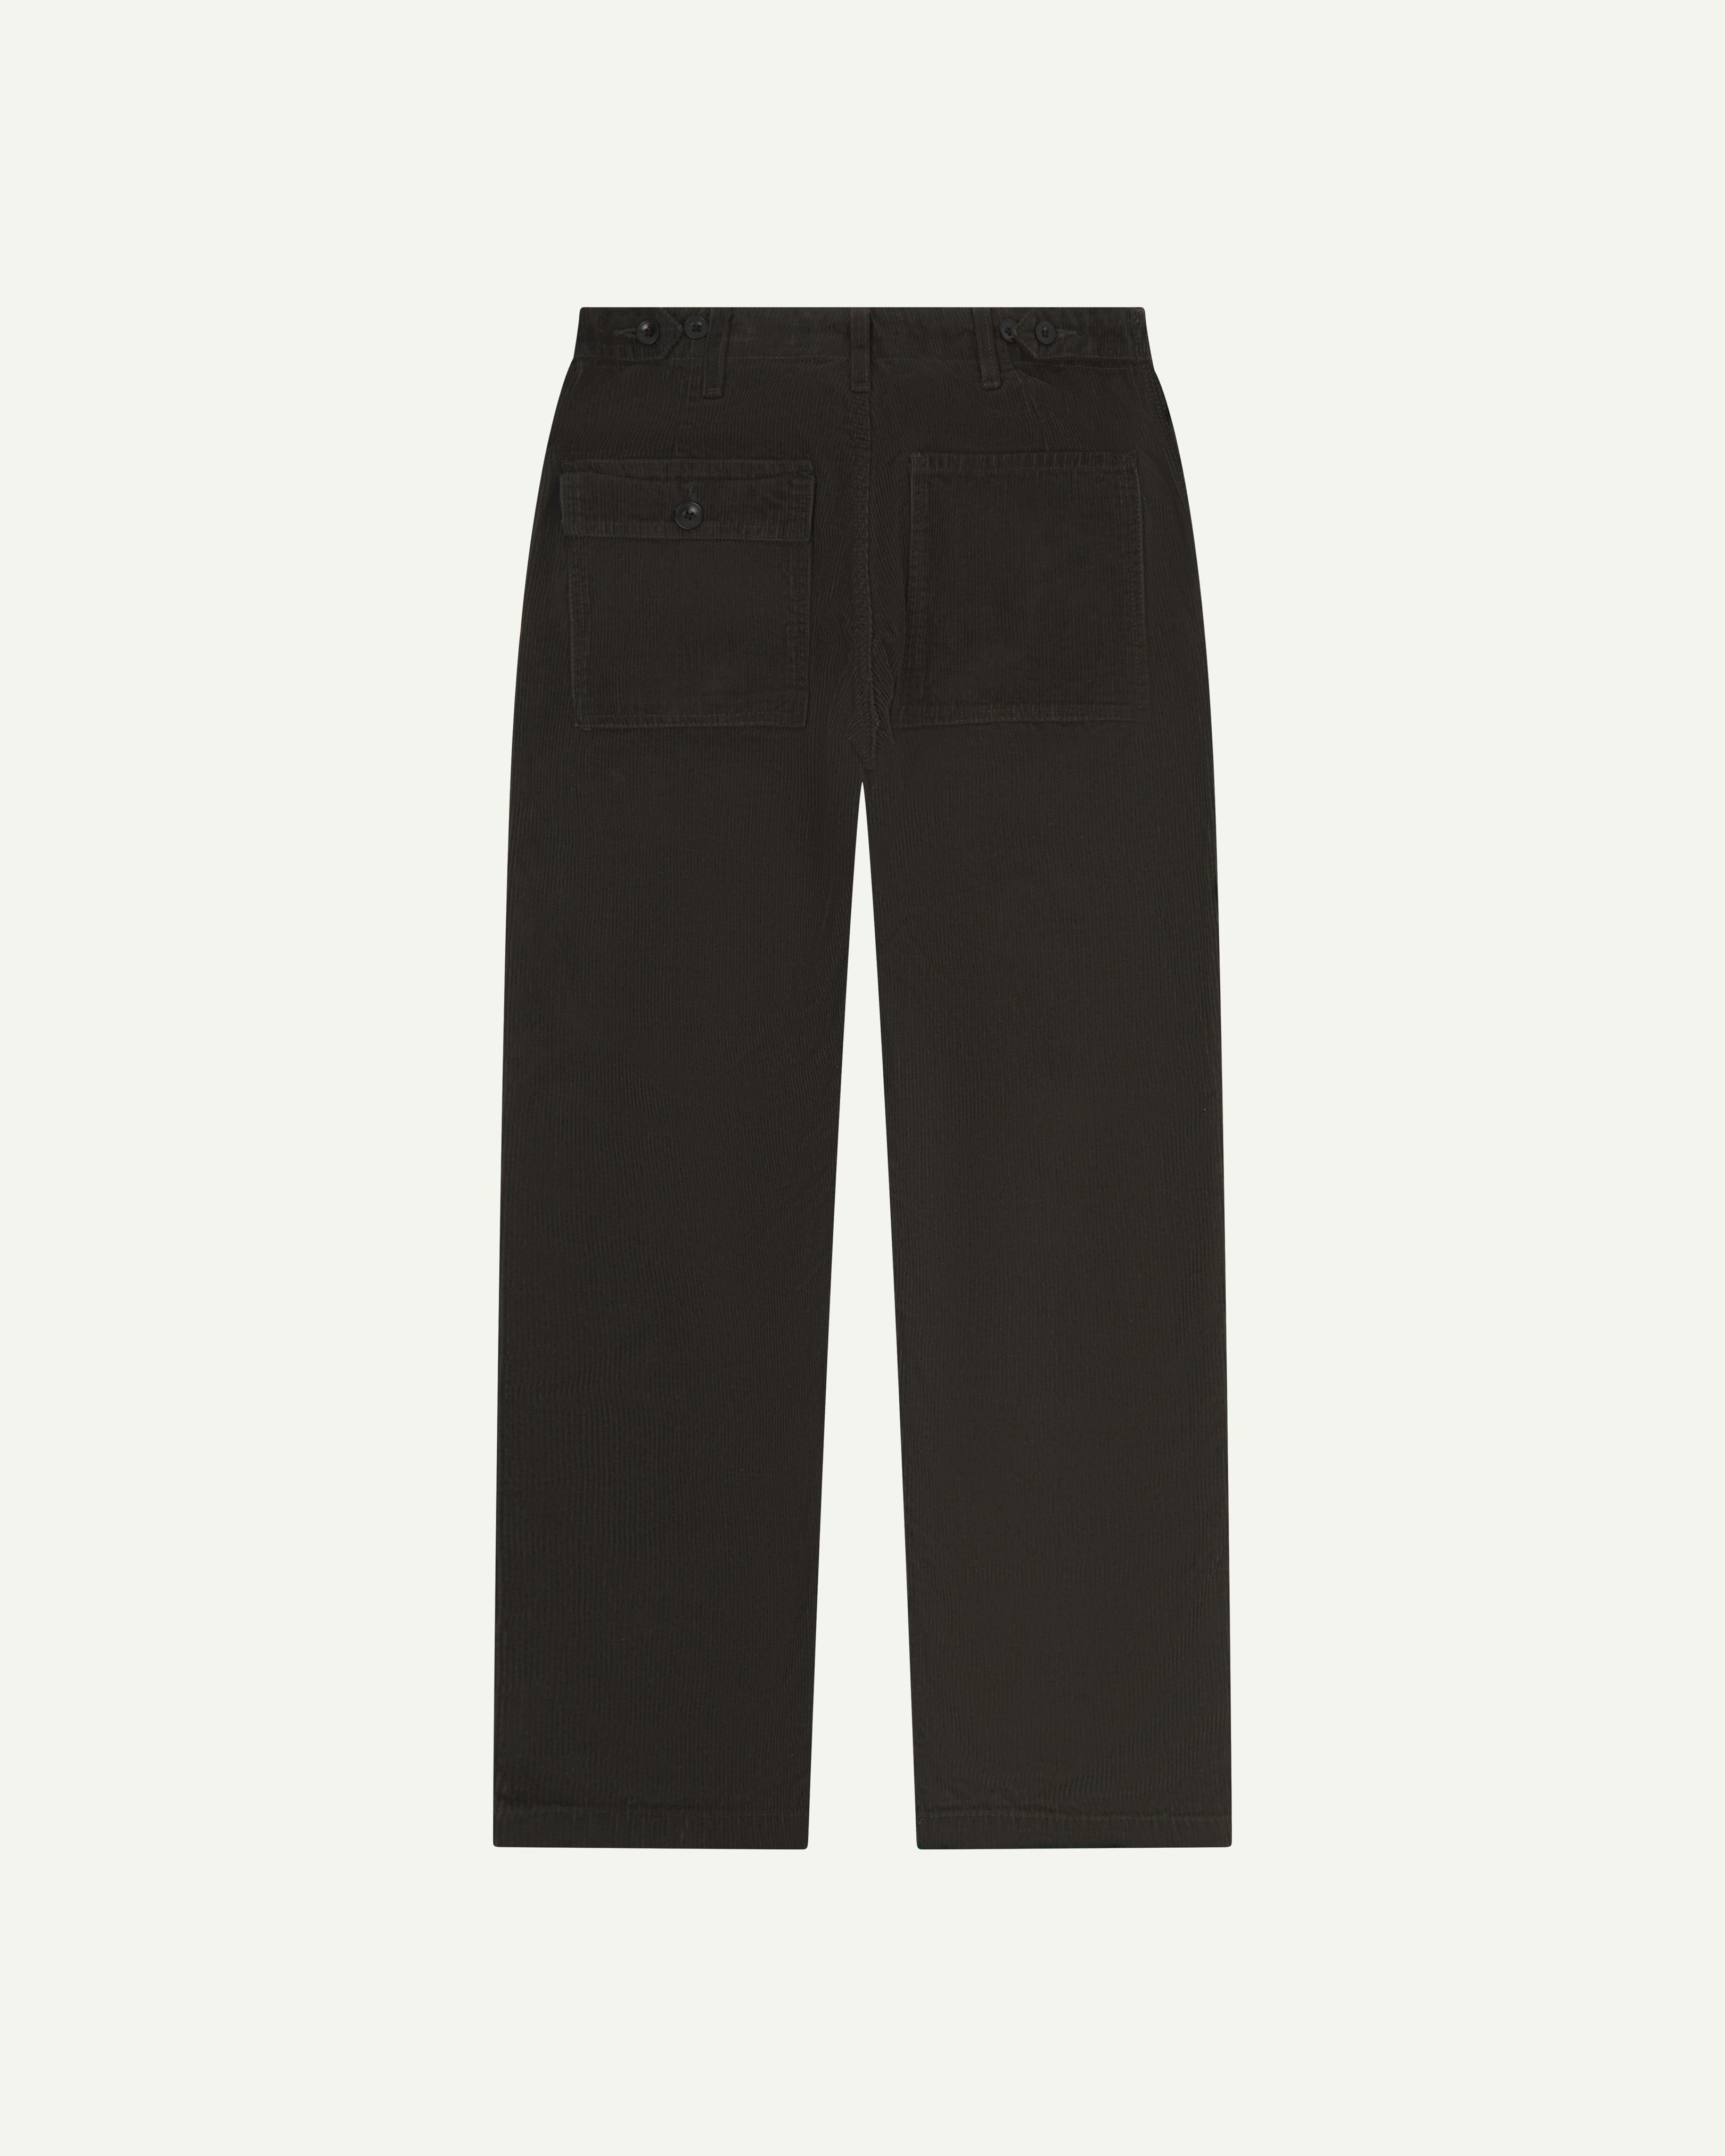 Back flat shot of #5005 Uskees men's organic cord 'faded black' casual trousers